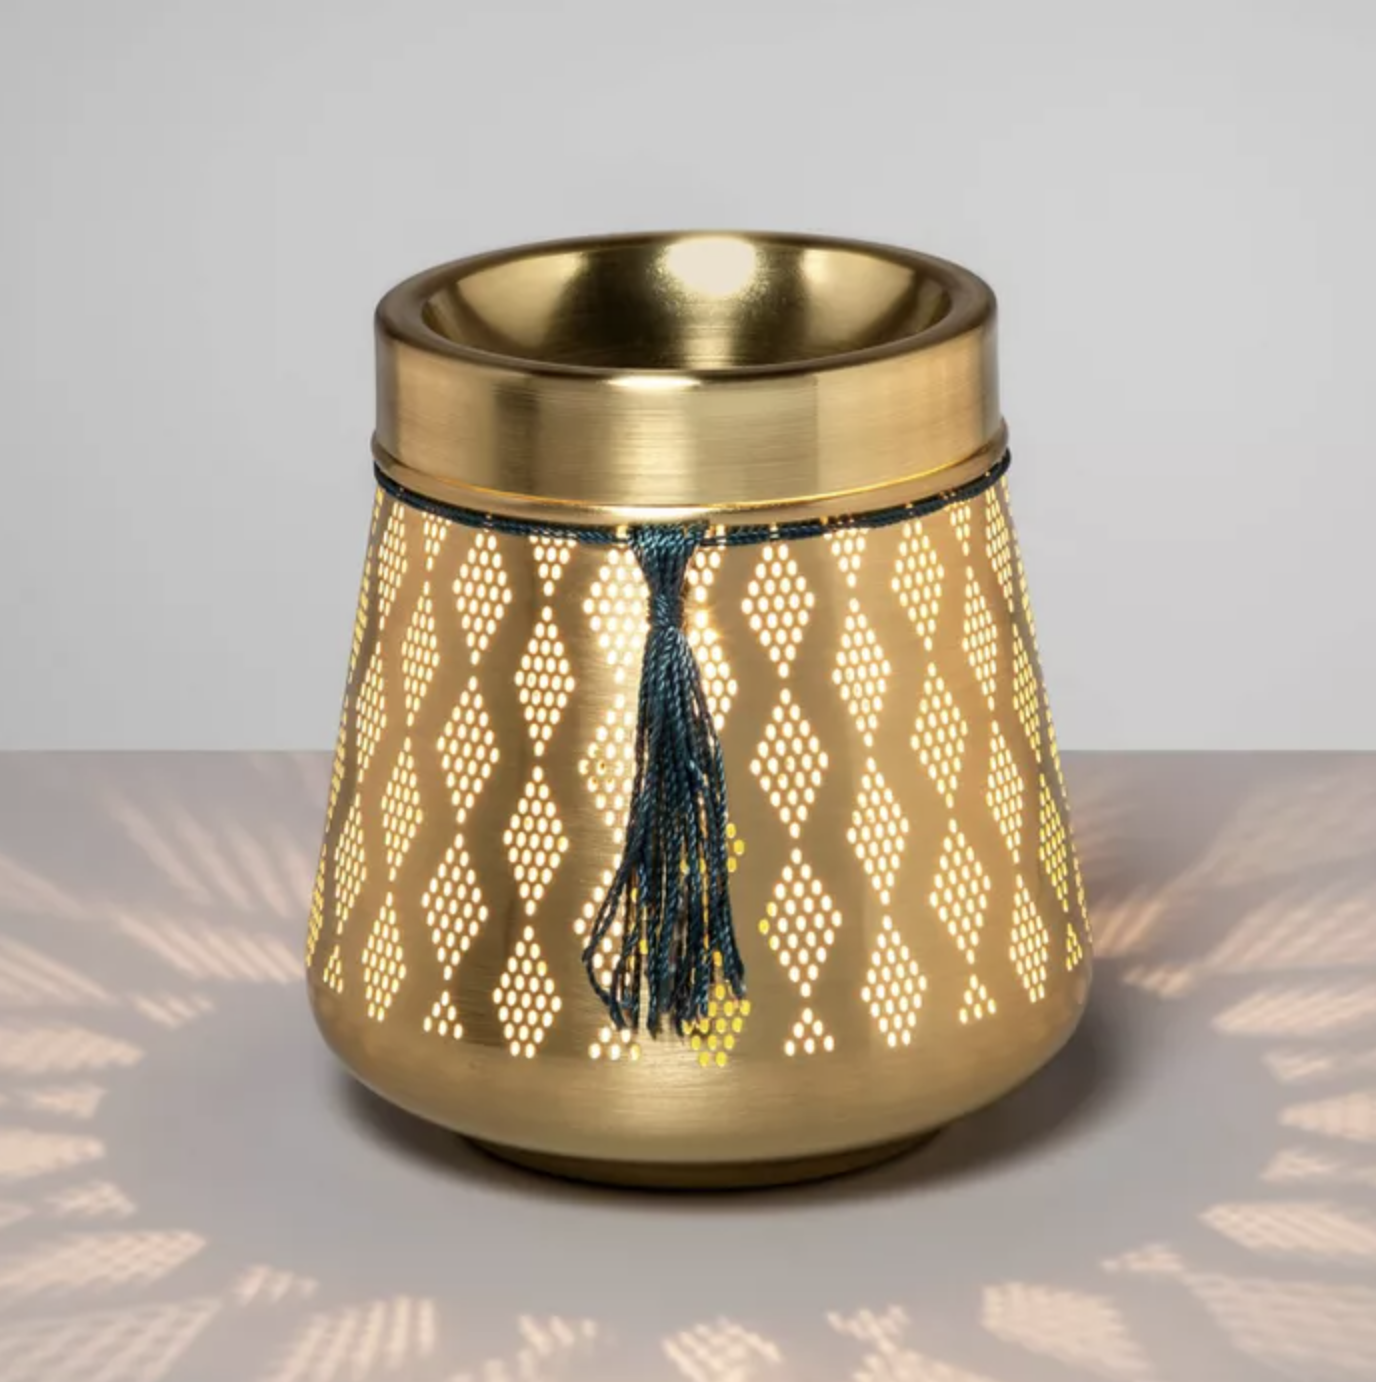 The gold wax melter which has a punched design and tassel accent